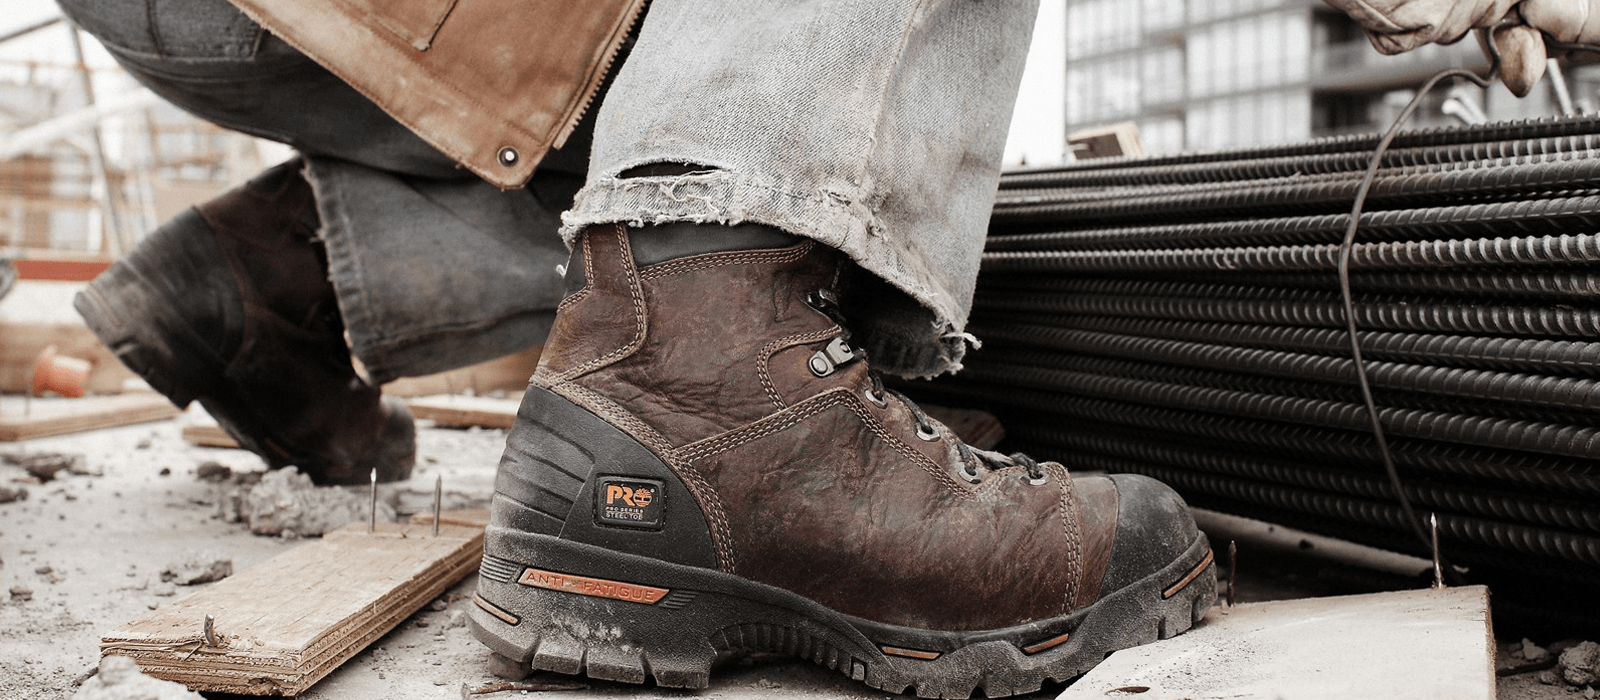 Best Safety Boots 2022: For the Garage or Job Site - Tool Digest